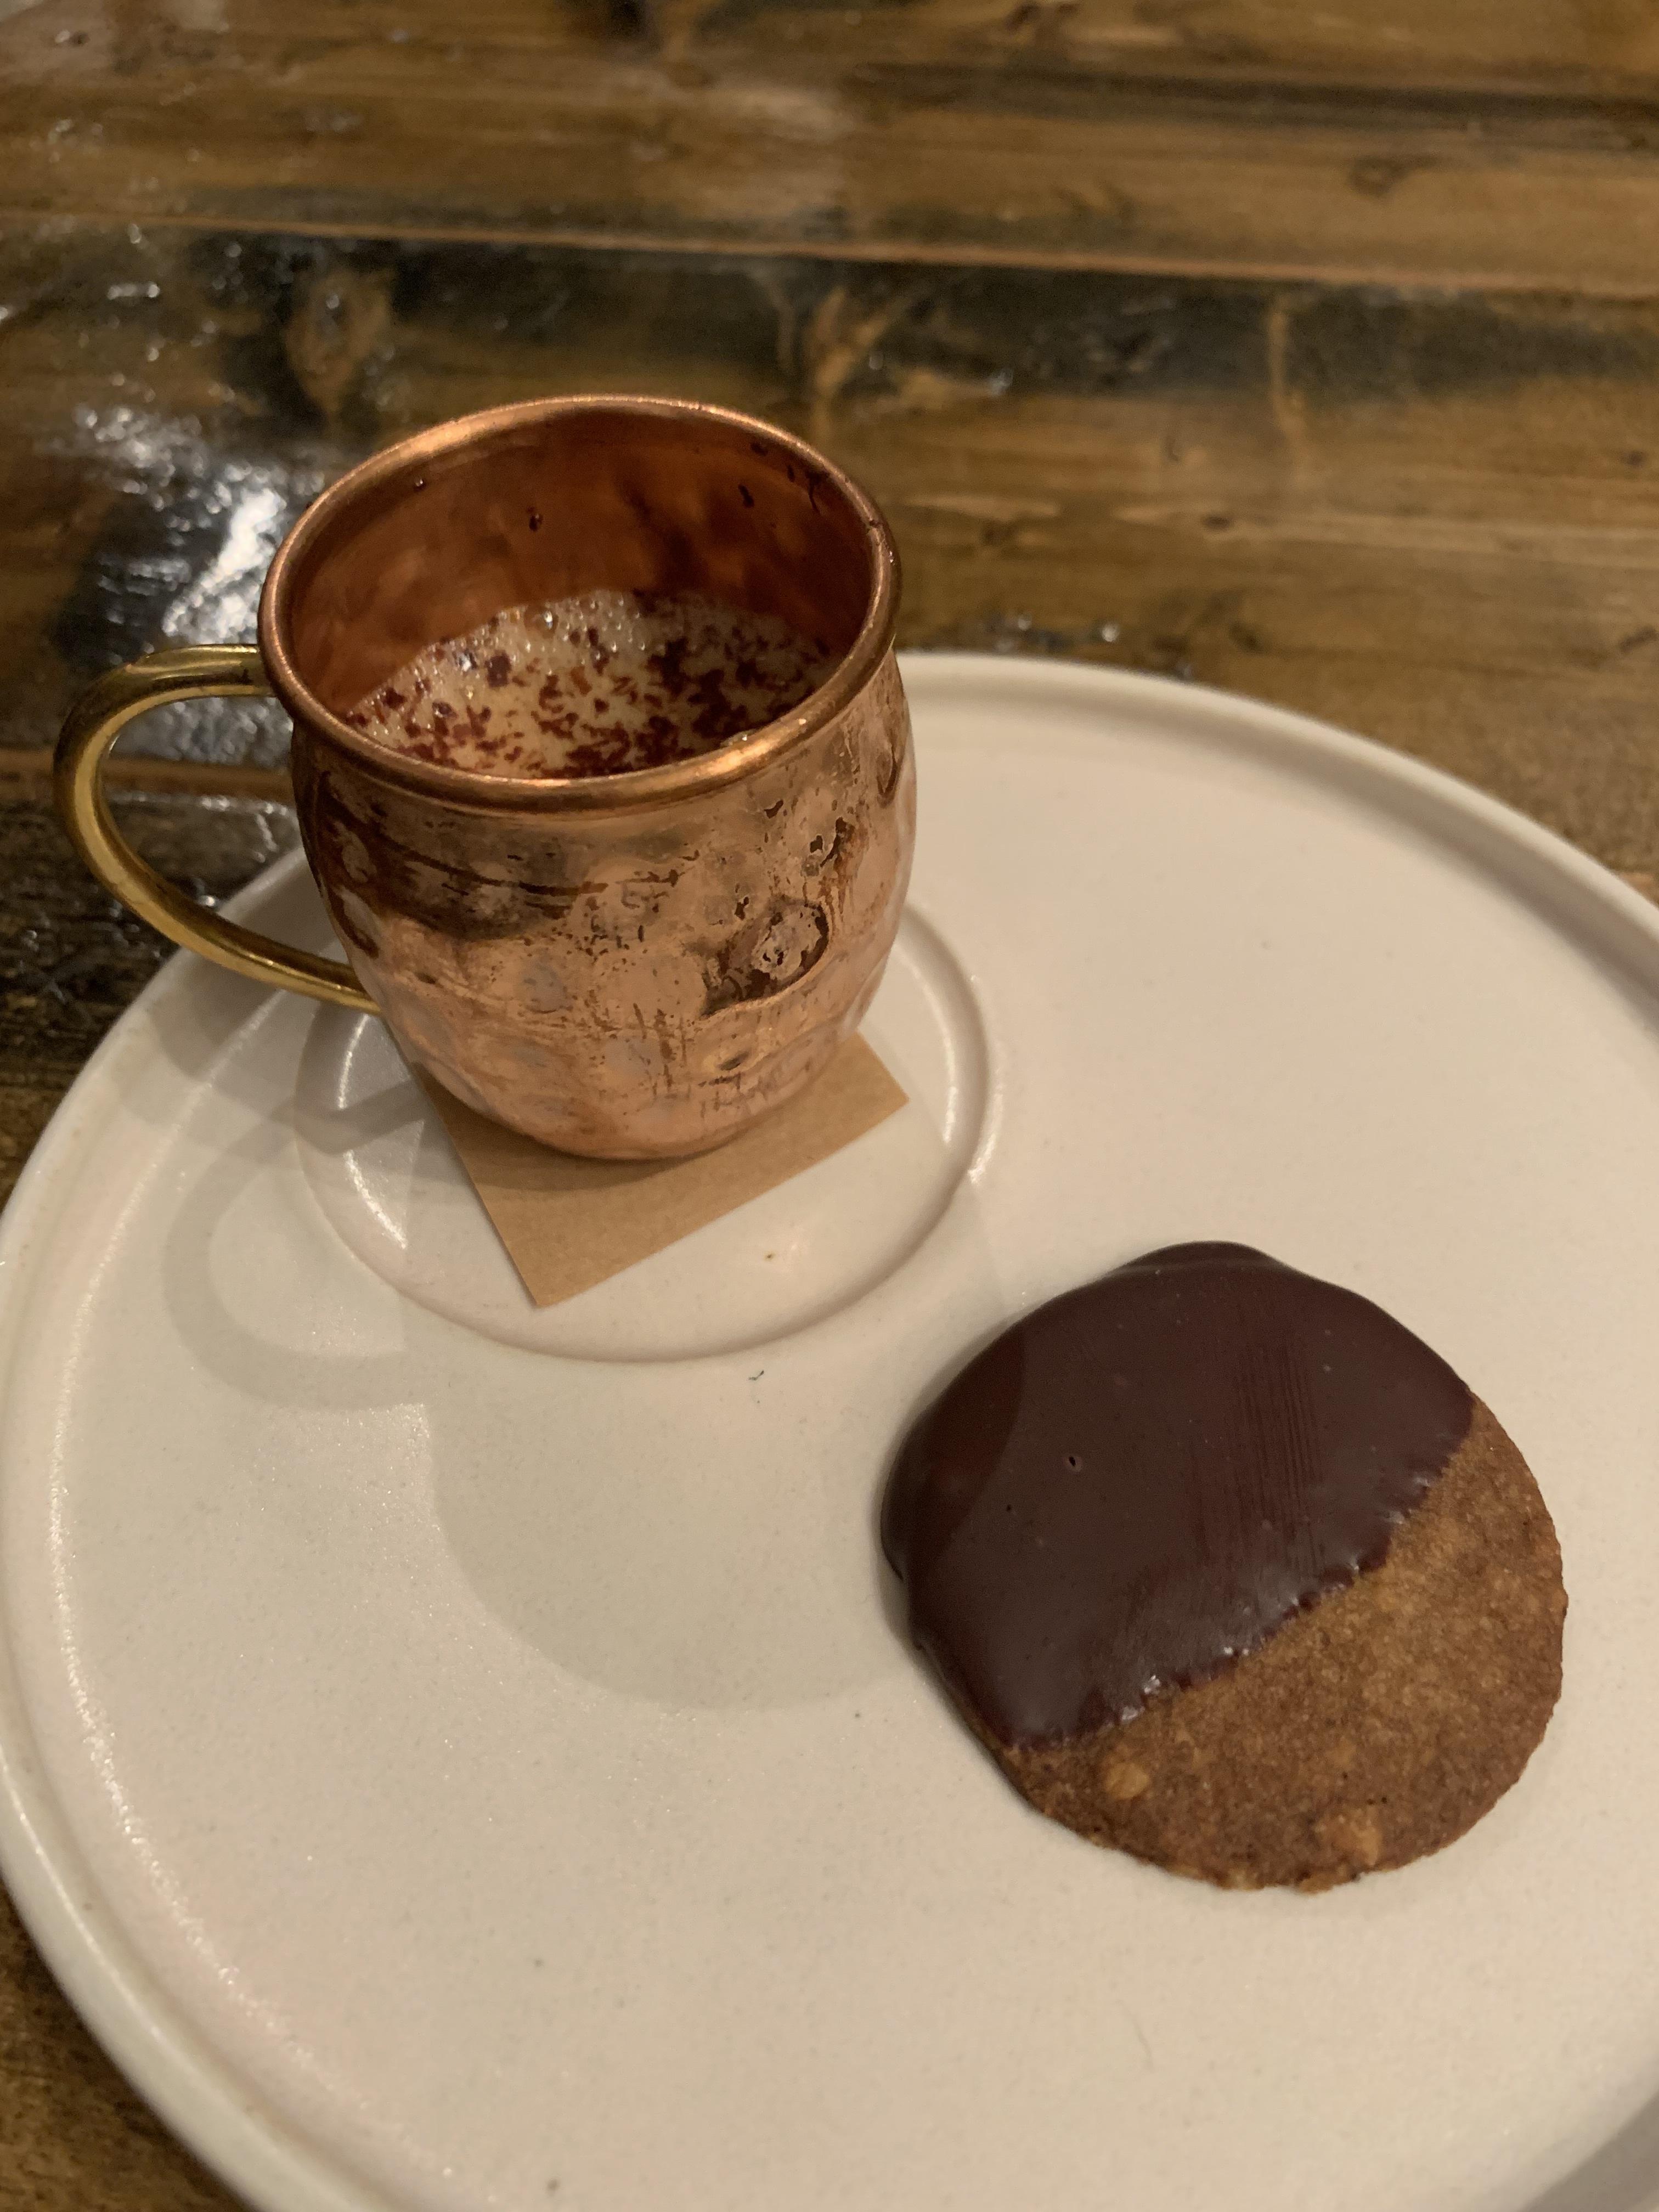 A small cup of milk topped with spices next to a small cookie that has been dipped in chocolate